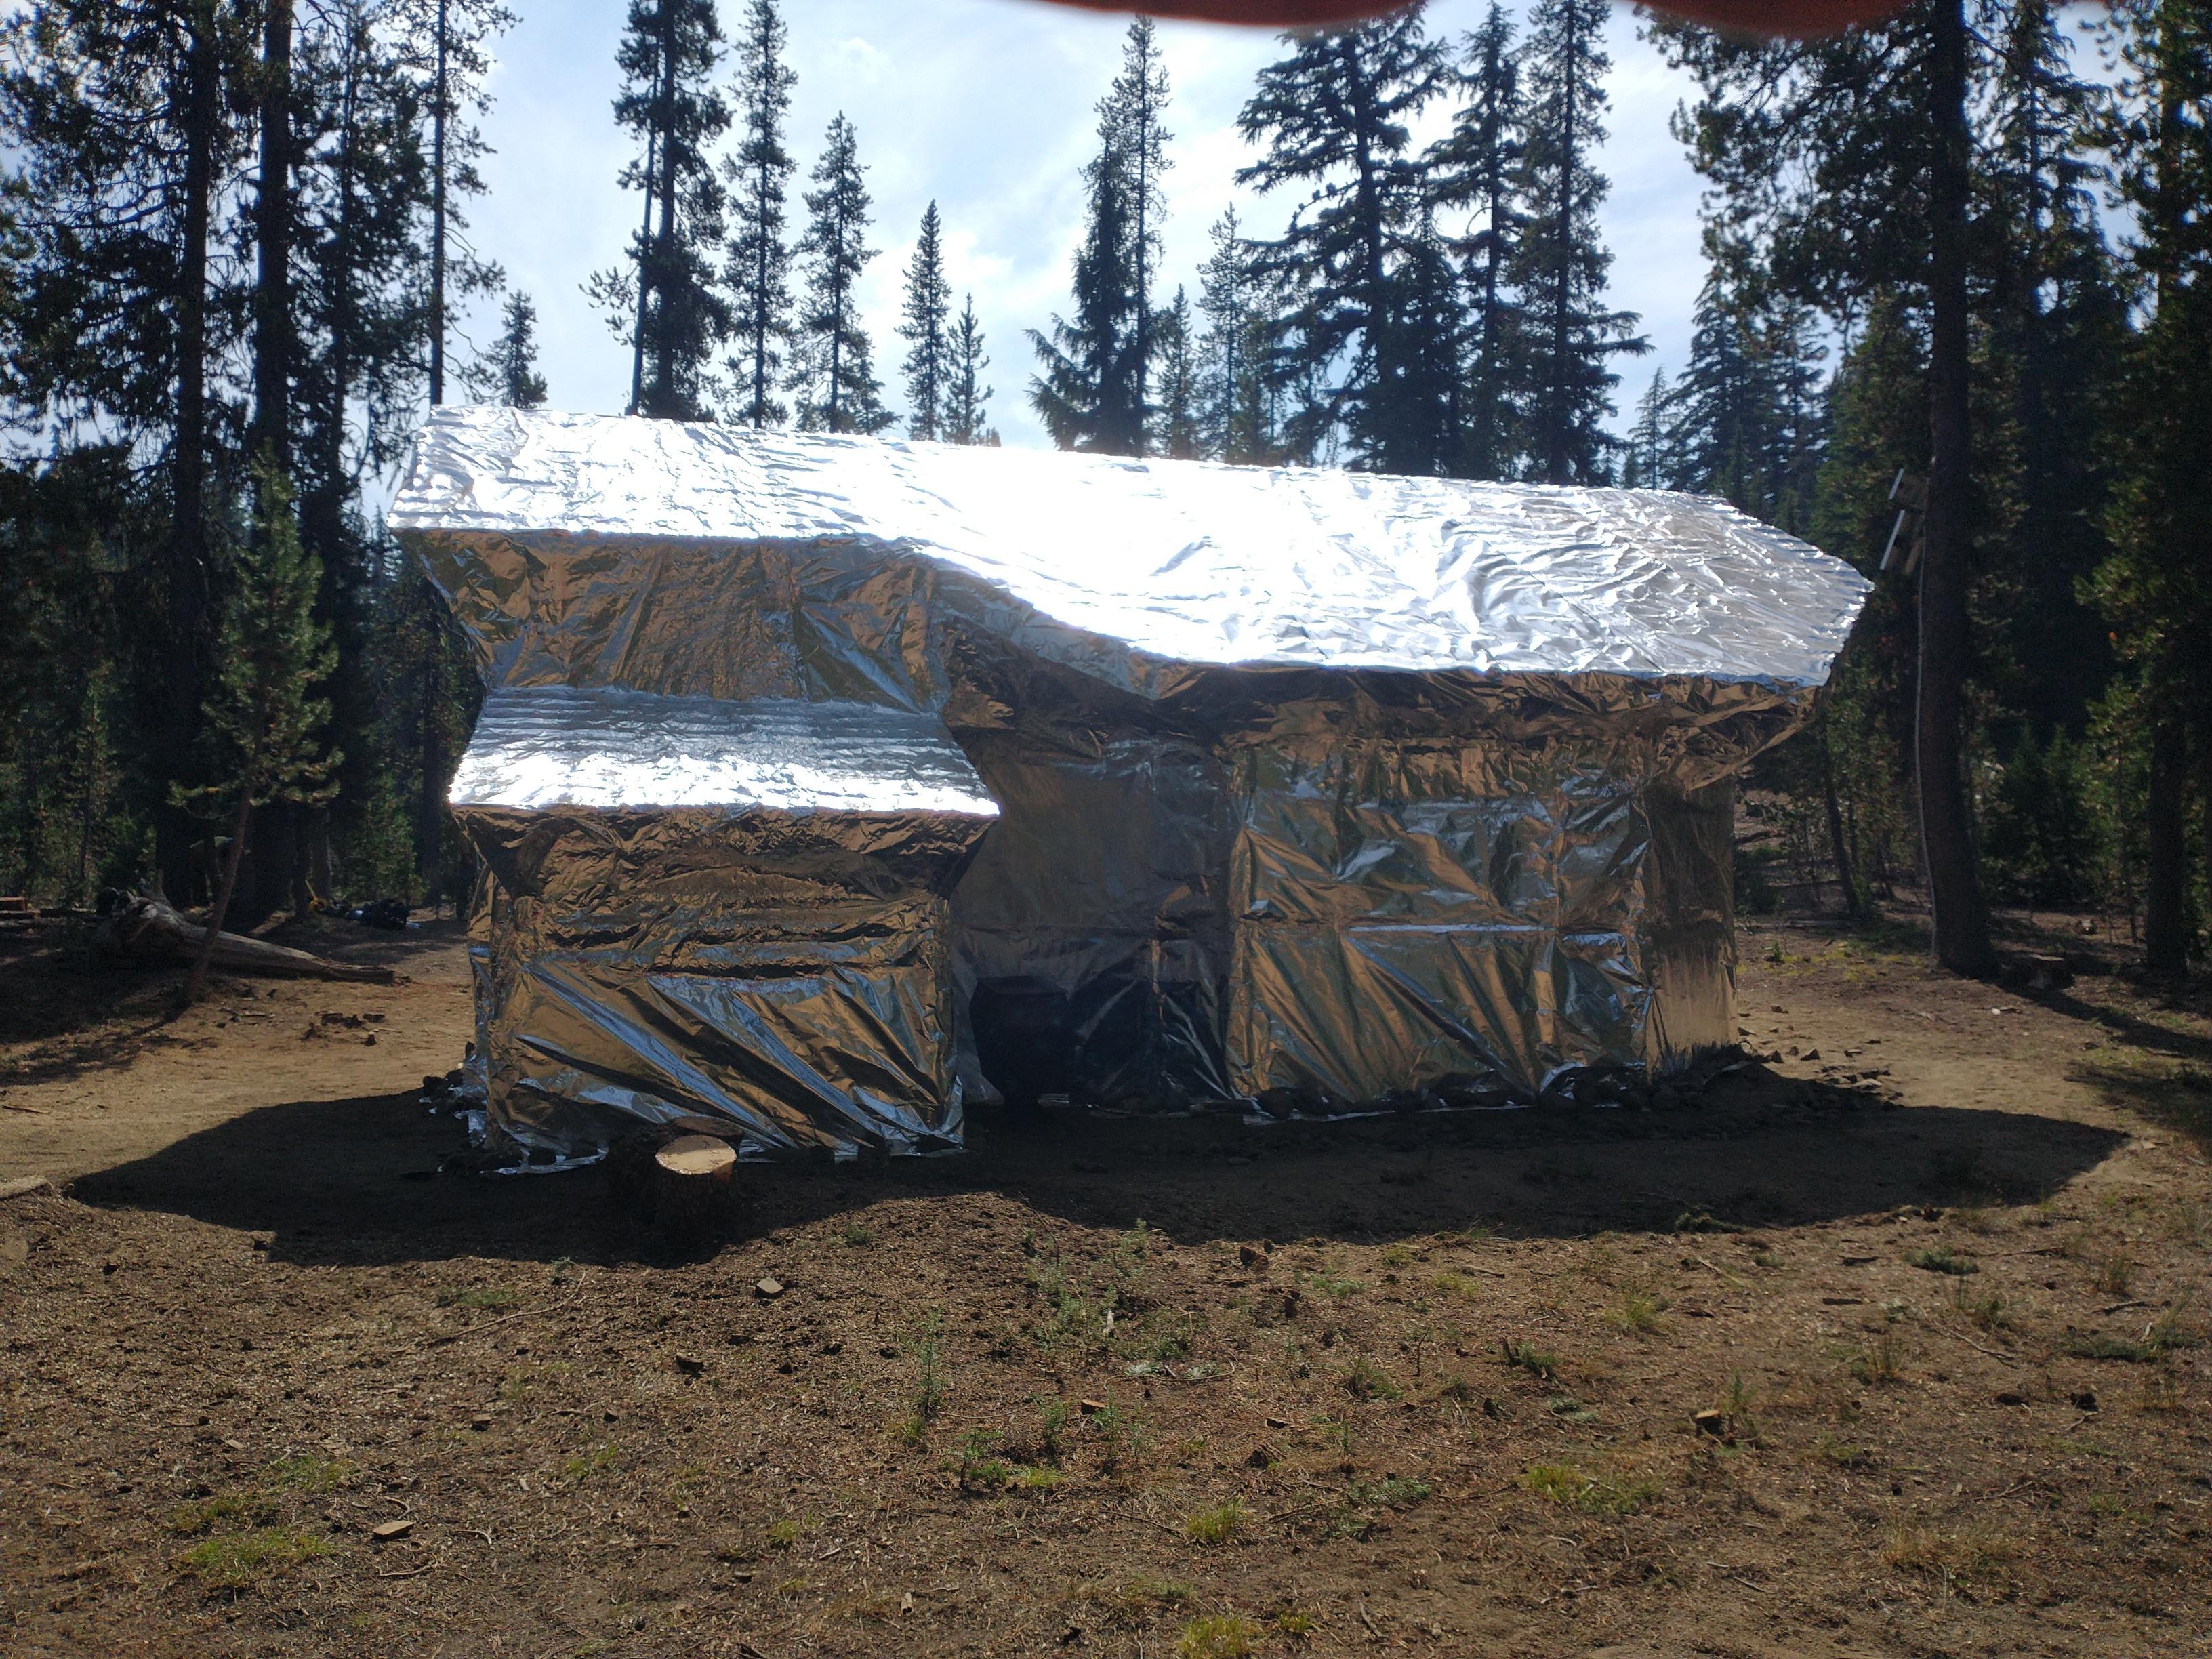 A cabin is wrapped in shiny silver foil in a pine forest